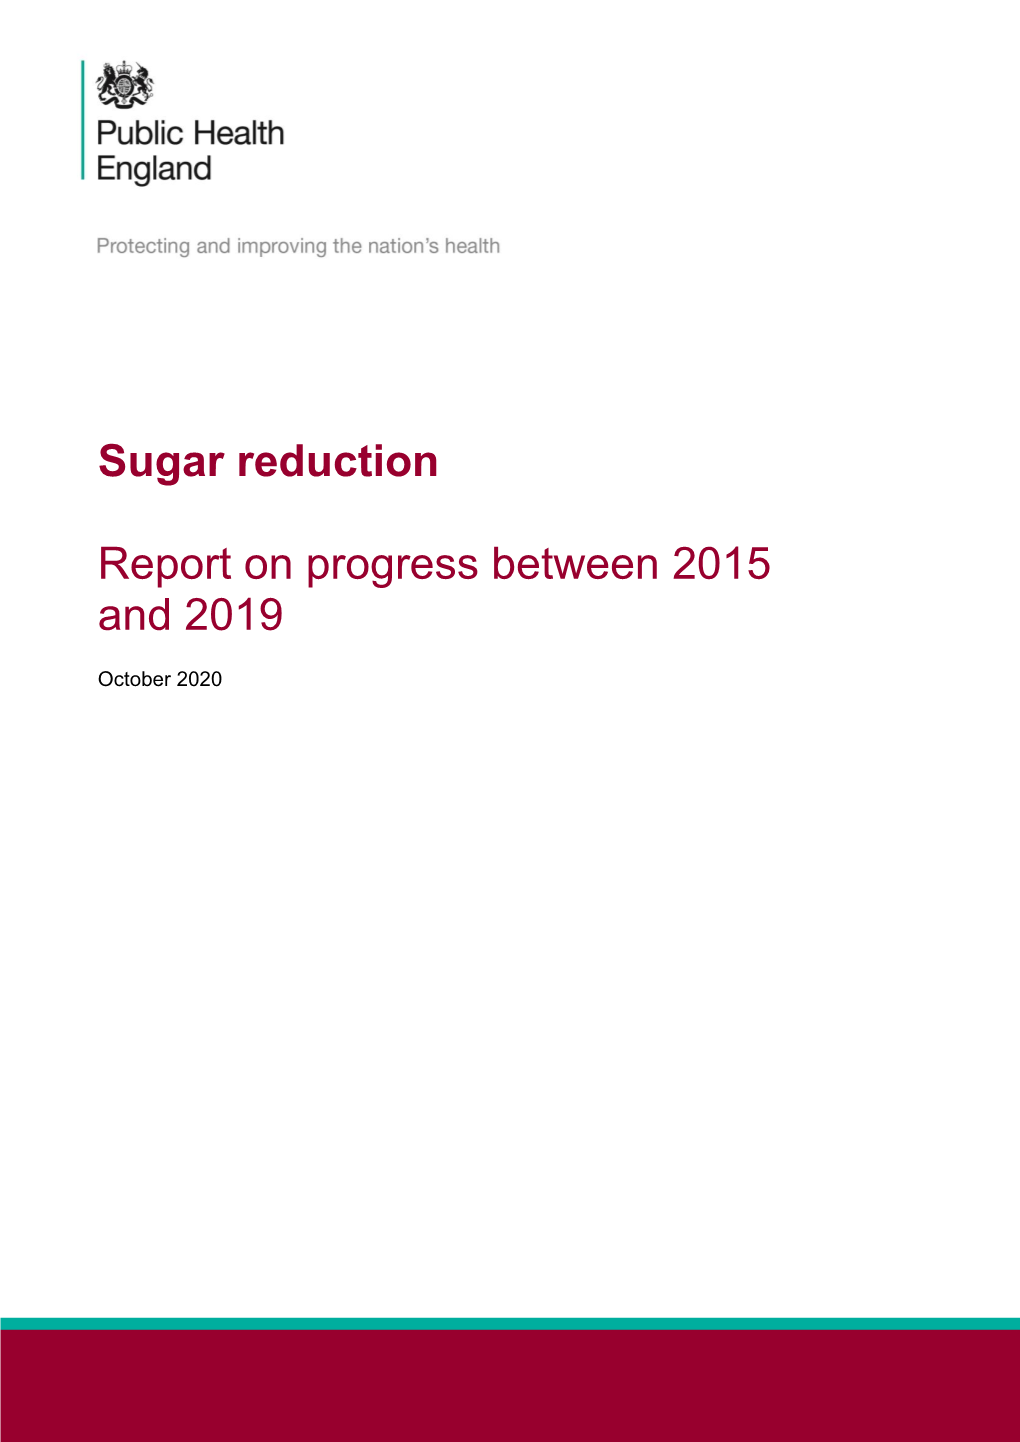 Sugar Reduction: Report on Progress Between 2015 and 2019